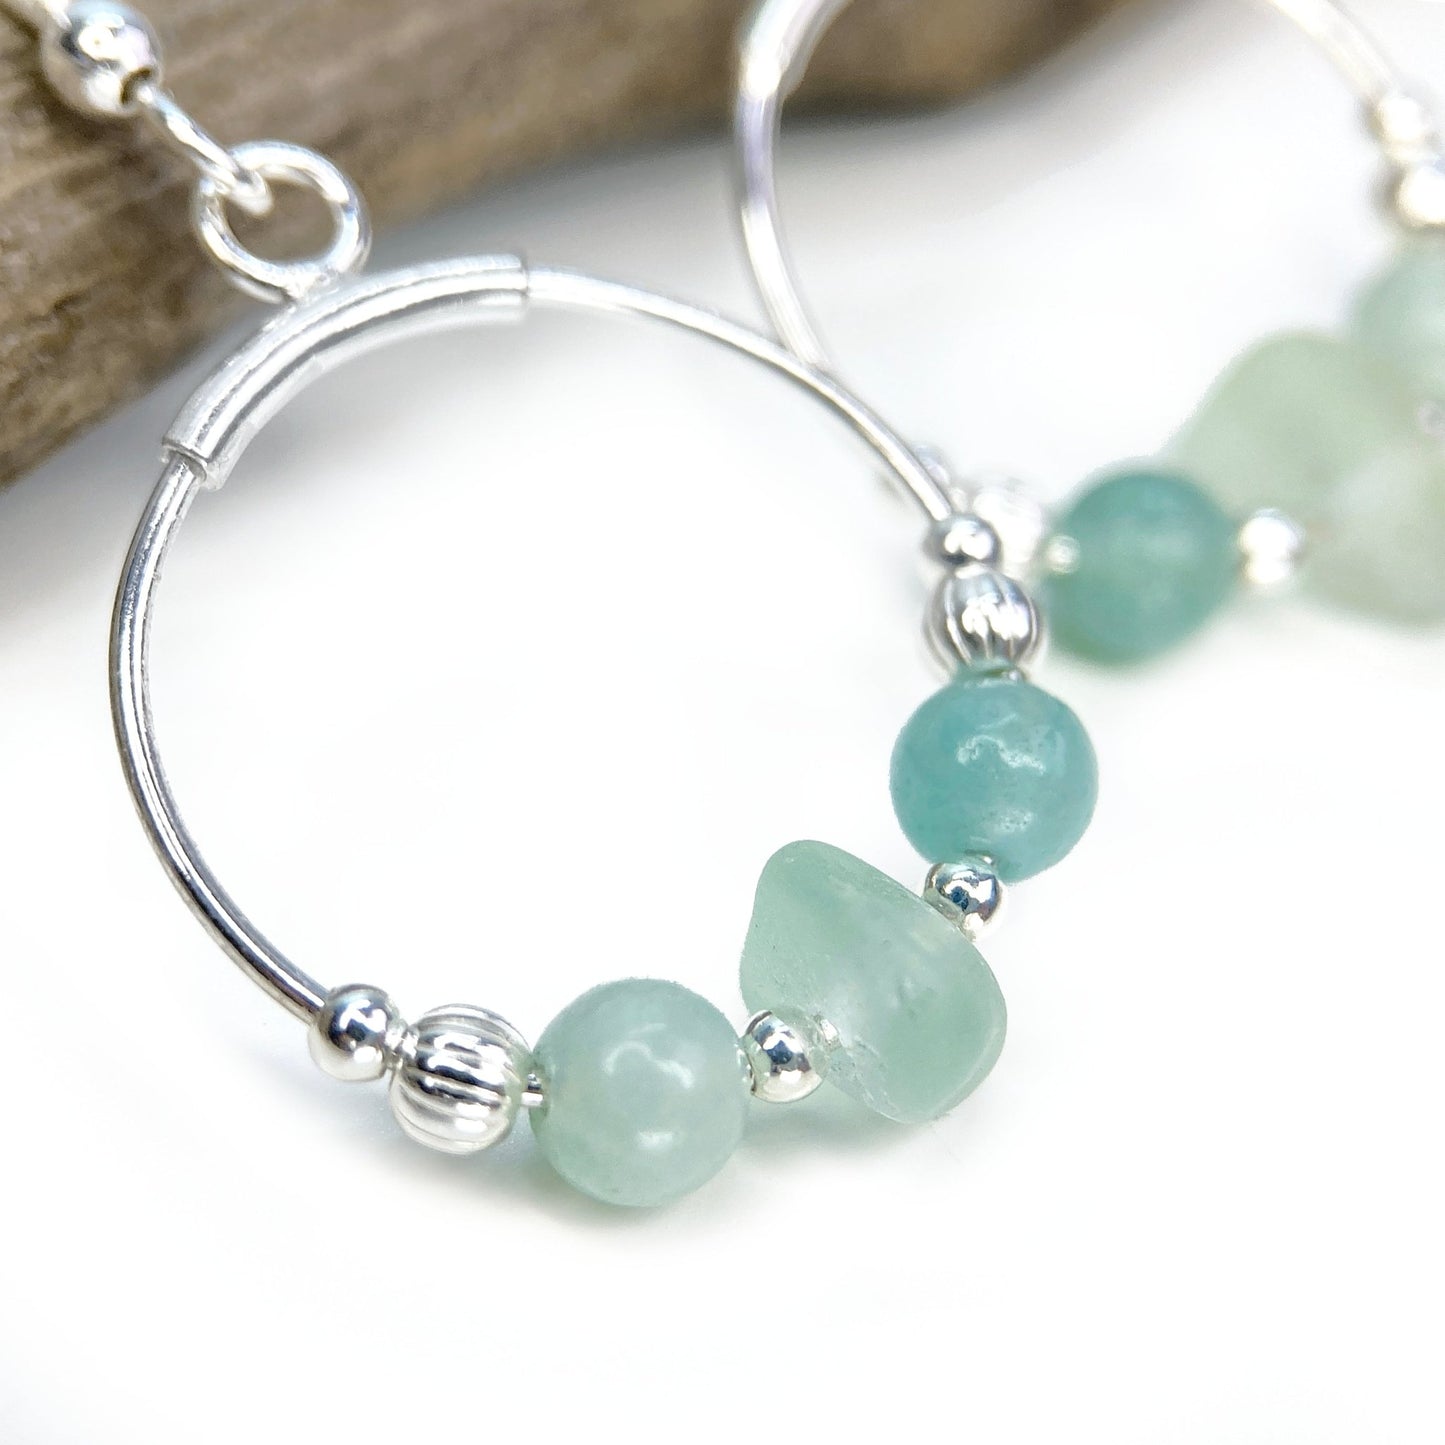 Green Sea Glass Dangly Earrings - Sterling Silver Beaded Hoops with Amazonite Crystal - East Neuk Beach Crafts